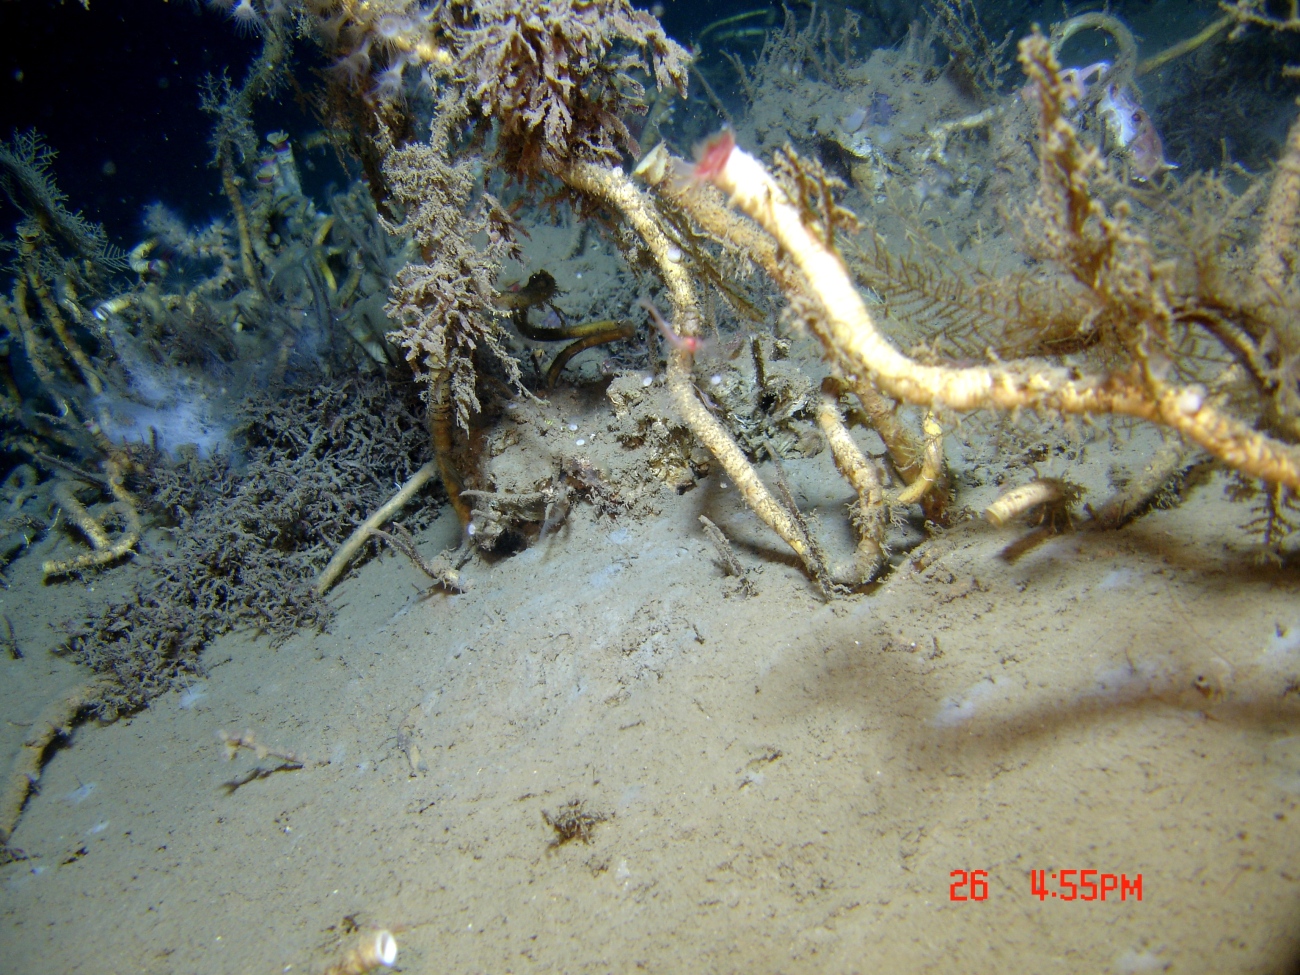 A cold seep site with lamellibrachian tube worms